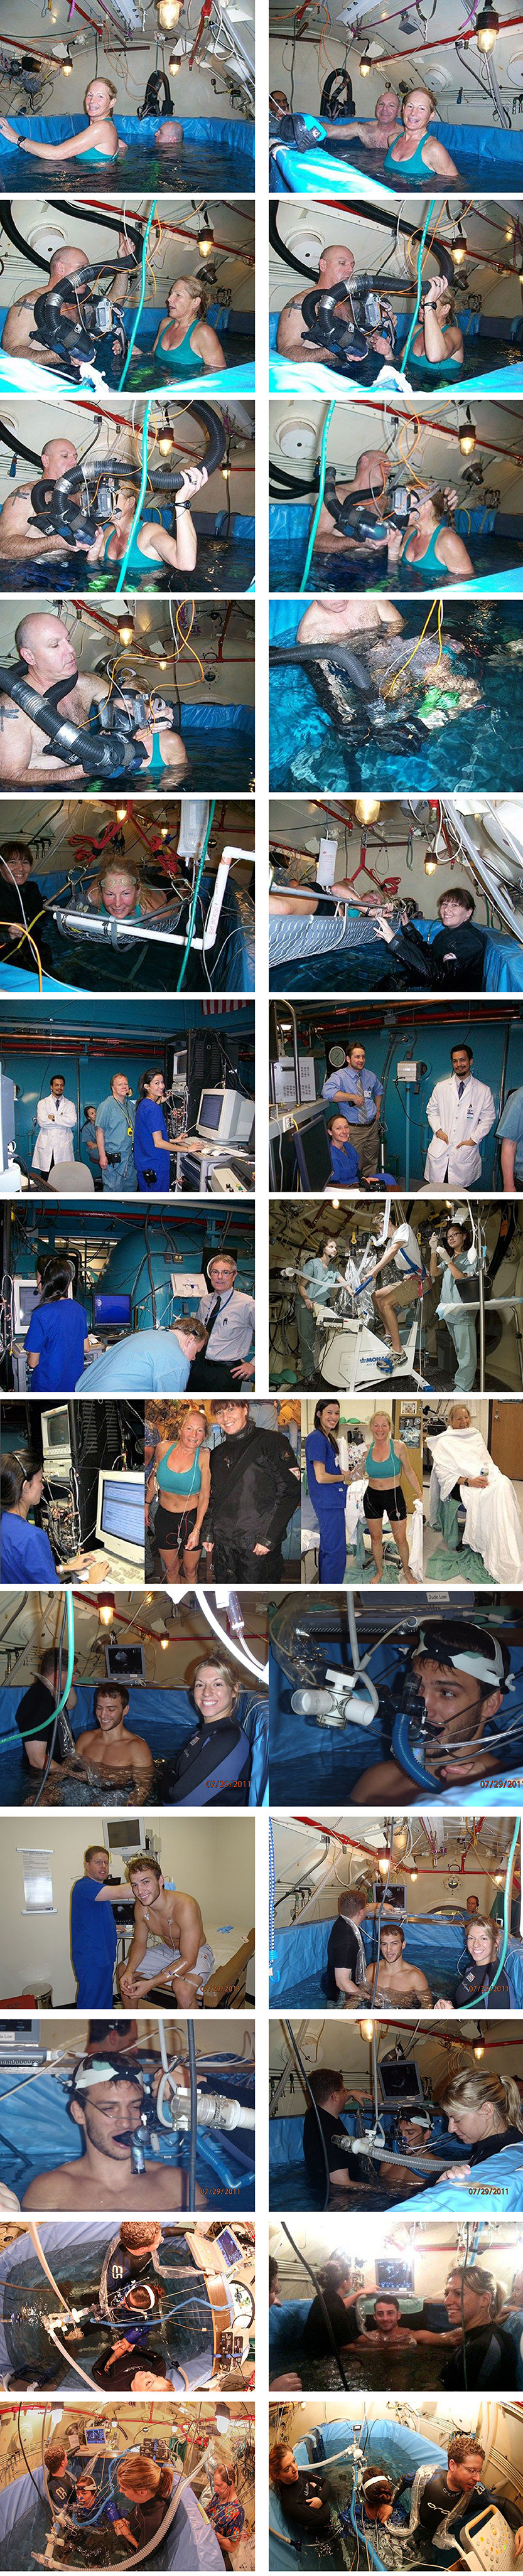 Hyperbaric Research photos collage